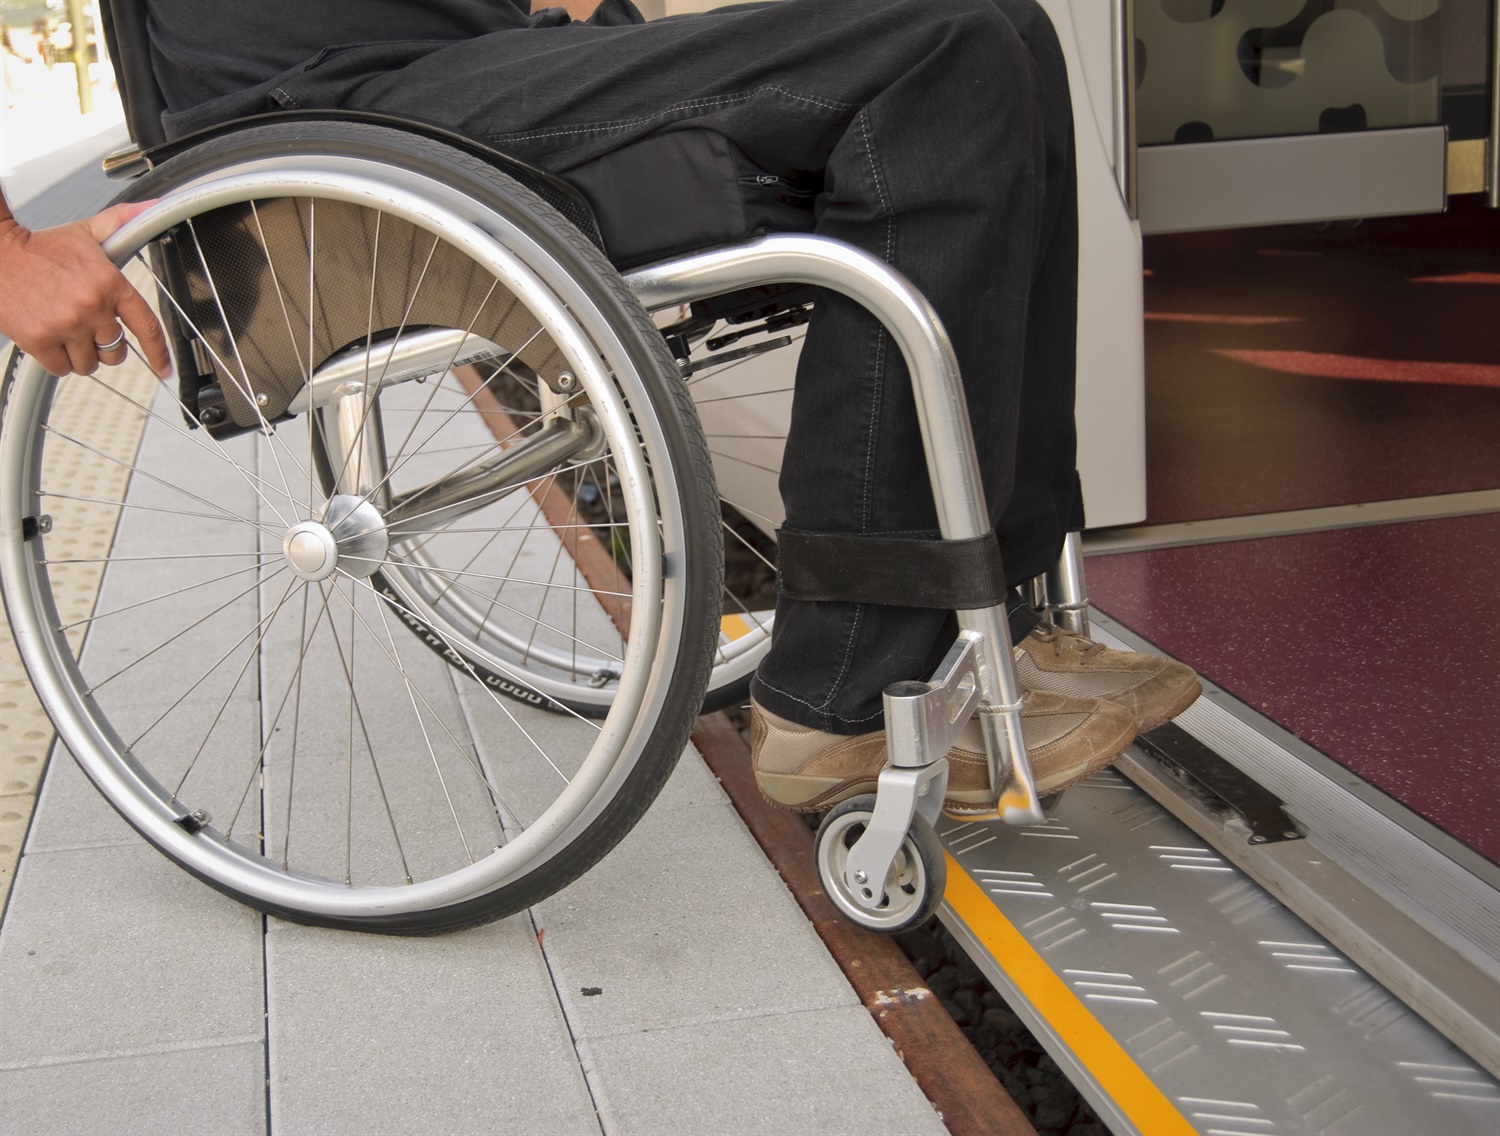 DfT launches consultation to improve transport for disabled passengers